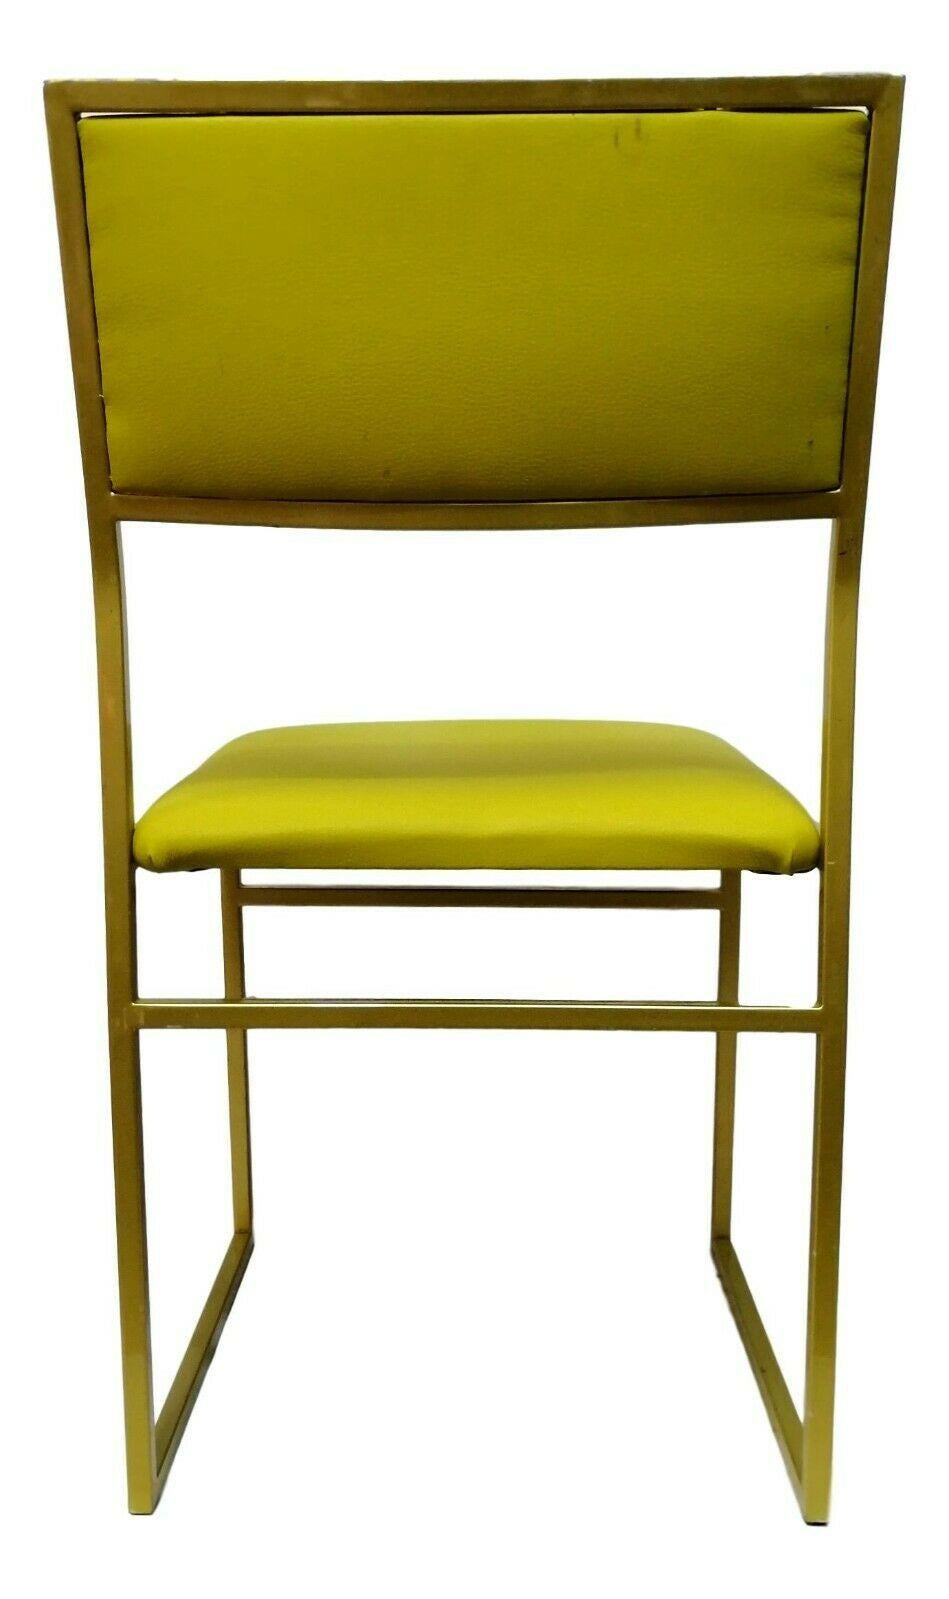 Original design chair from the 70s, made with a golden lacquered metal frame, seat and back upholstered in acid green skay or chintz

Measures 78 cm in height, 42 cm in width, 50 cm in depth and 45 cm in height of the seat from the ground in very